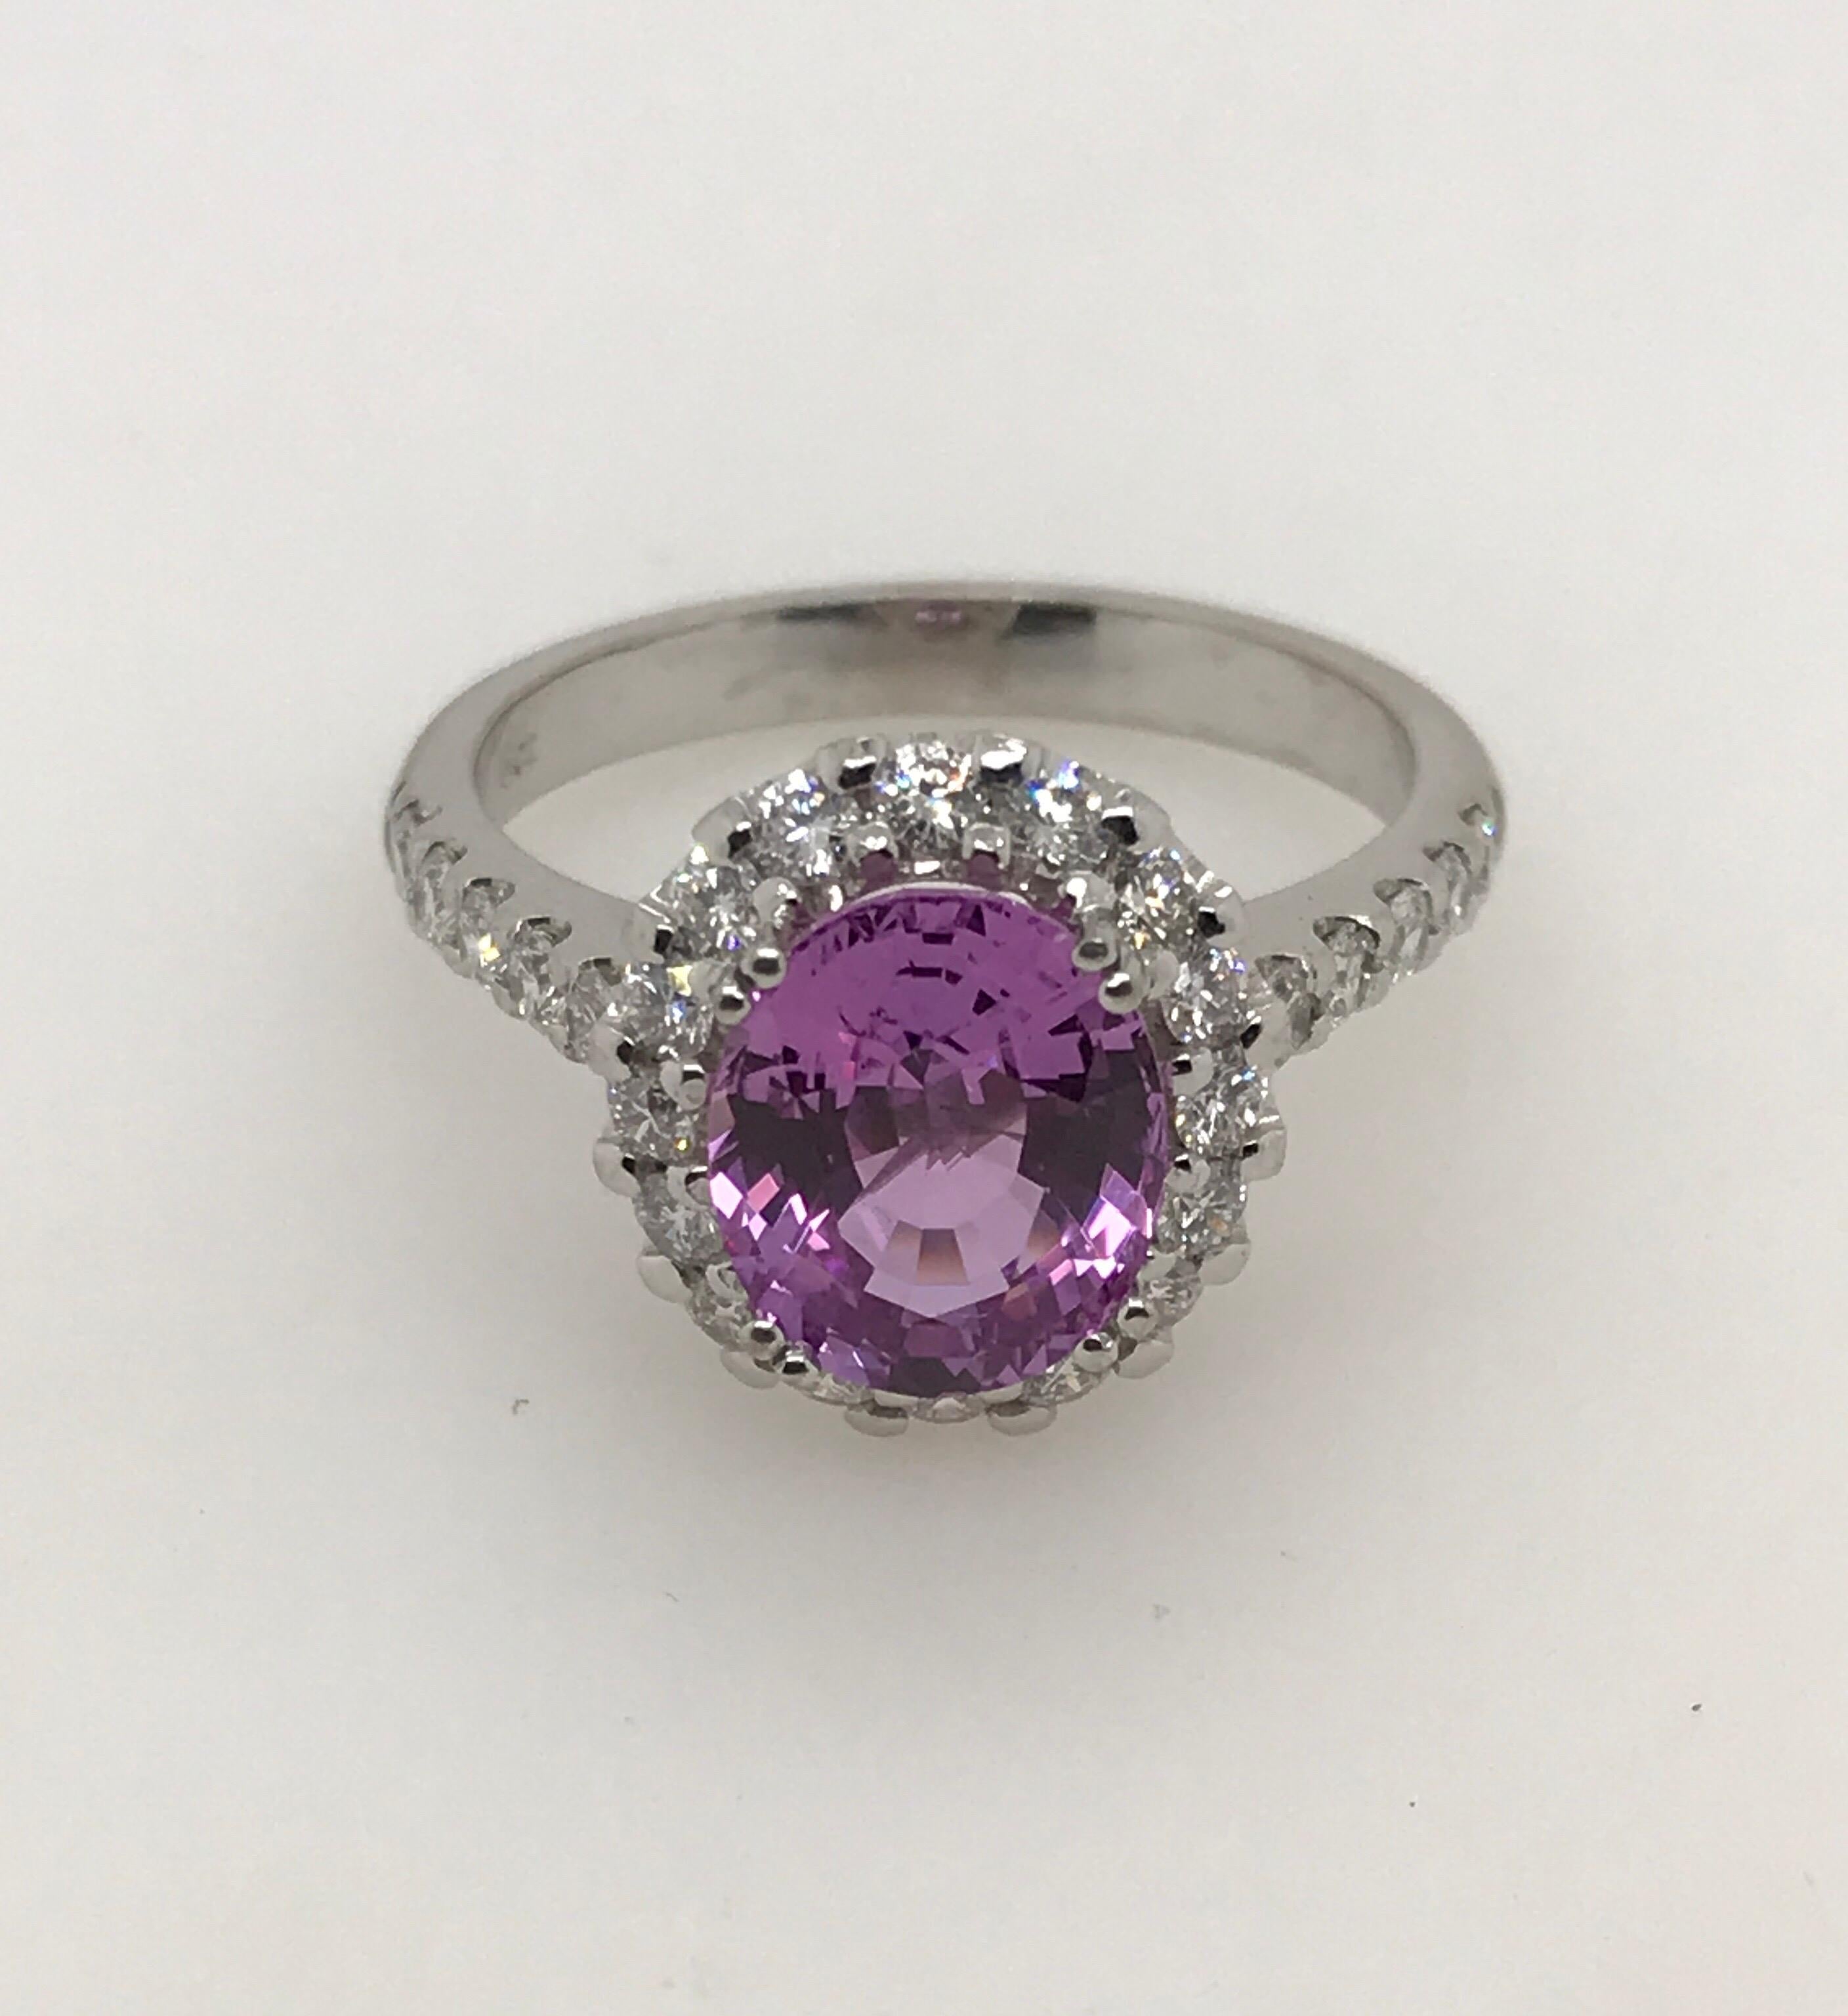 18ct white gold oval pink sapphire and brilliant cut diamond claw set cluster ring. The centre sapphire is 2.89ct and is moderately strong pink in colour.  26 round brilliant diamonds totalling 0.52ct F SI1 surround the centre stone and run down the